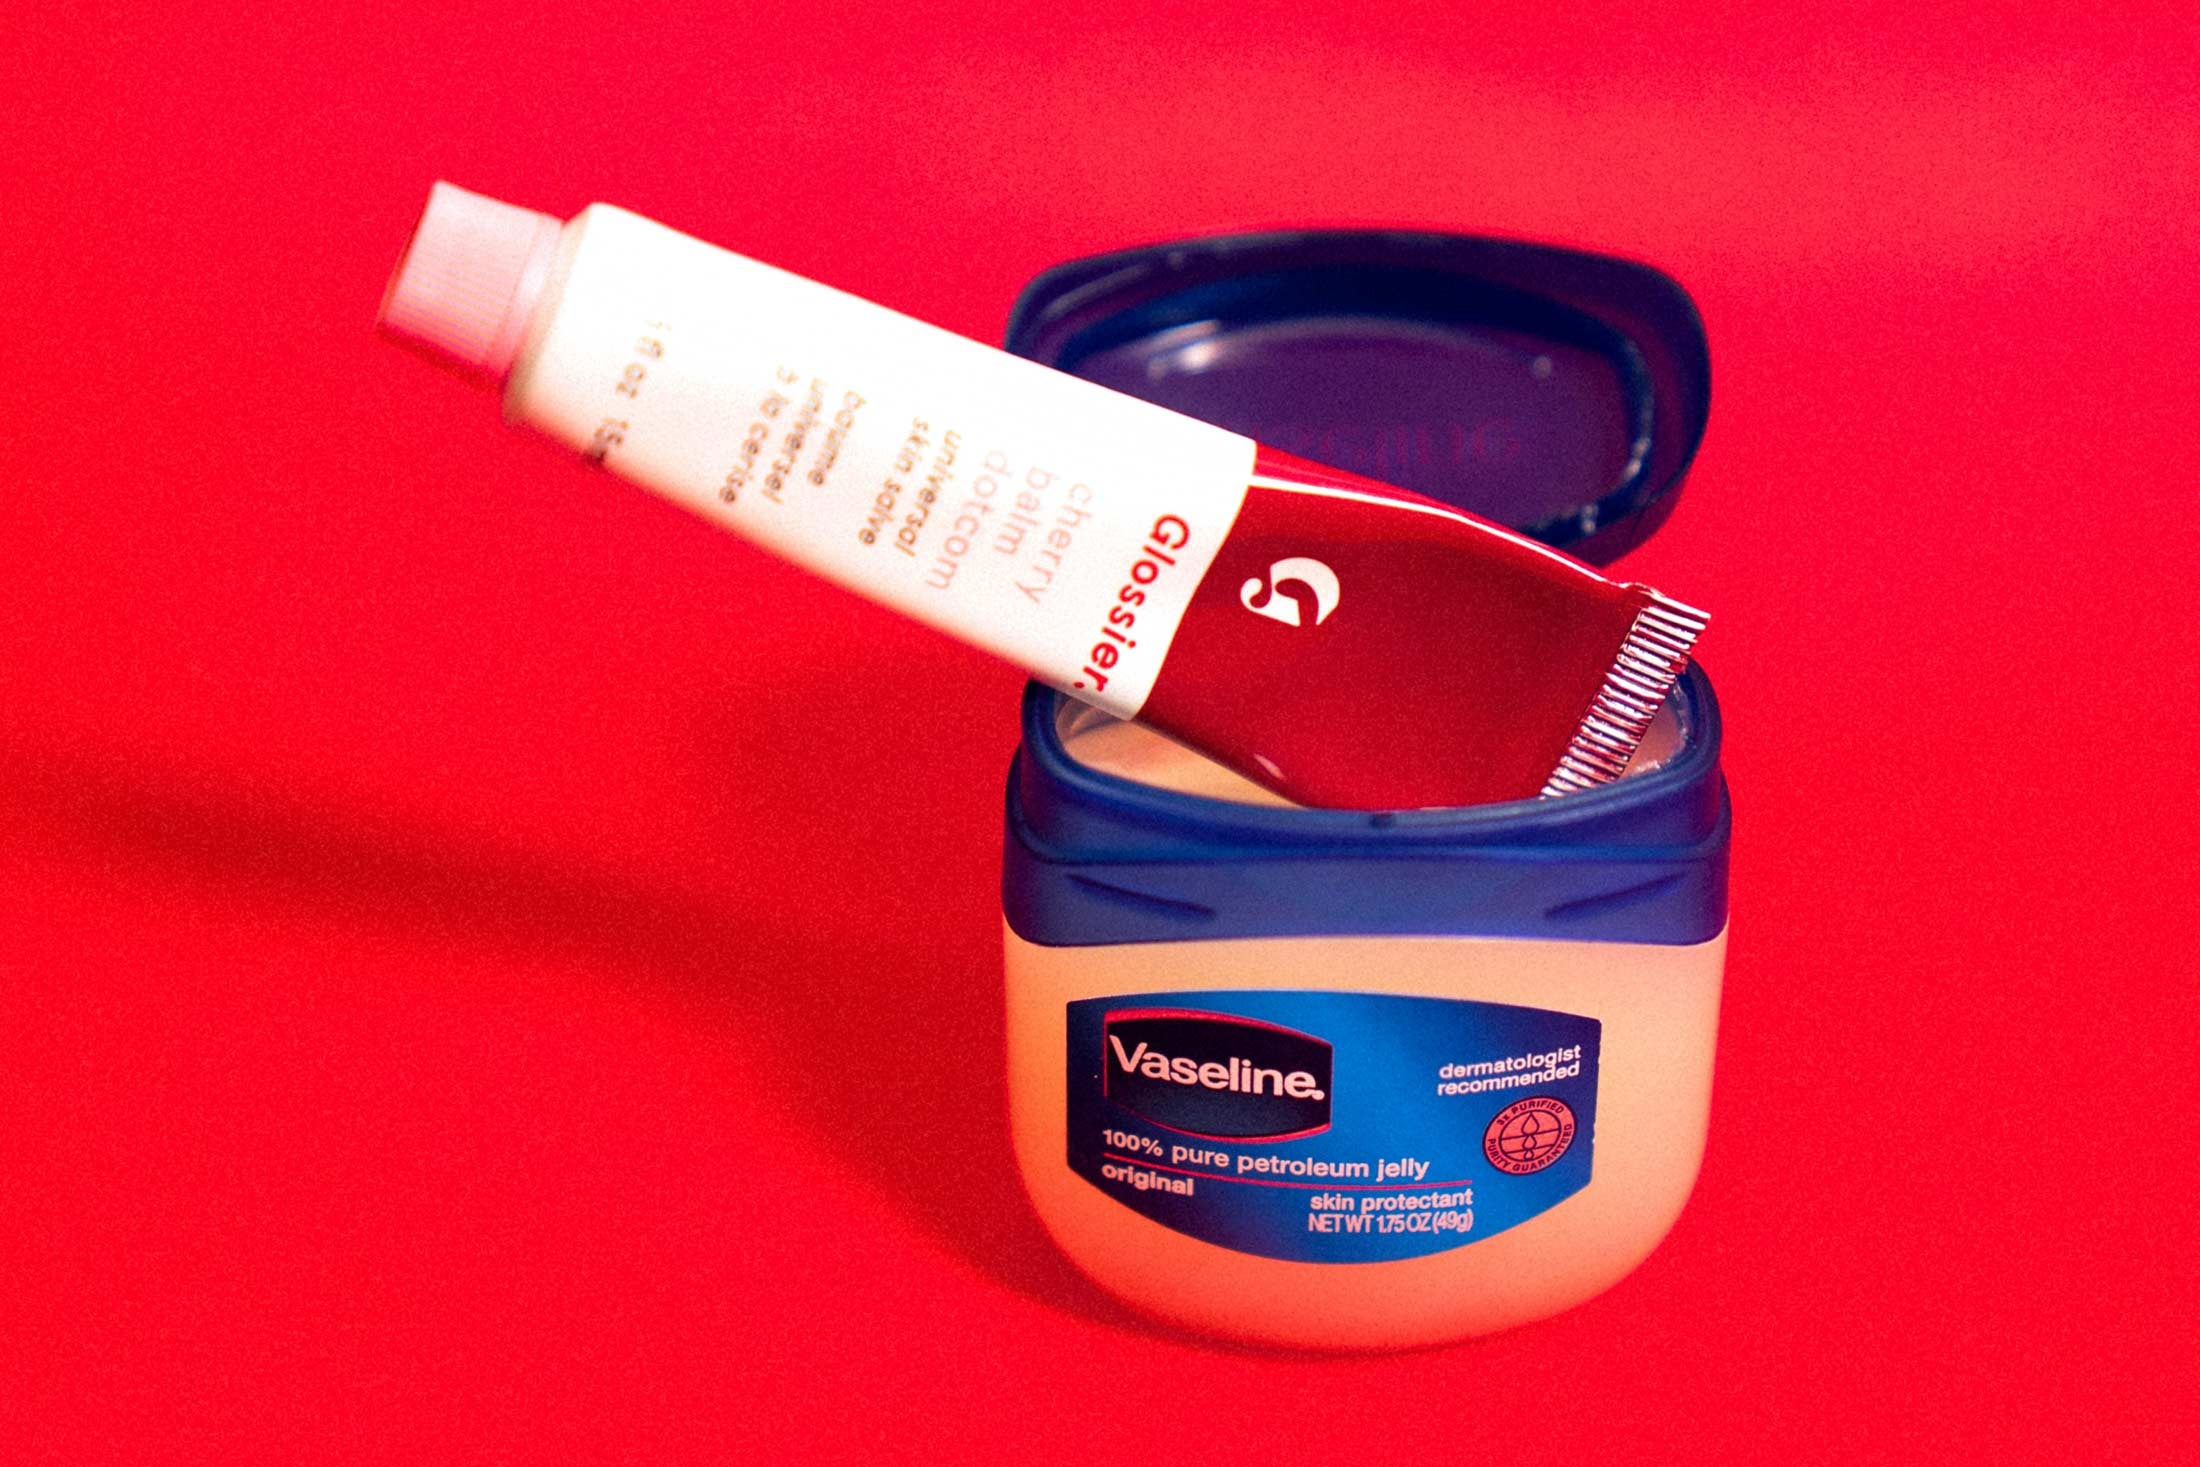 A tube of Glossier Balm Dotcom perched on top of an open jar of Vaseline.